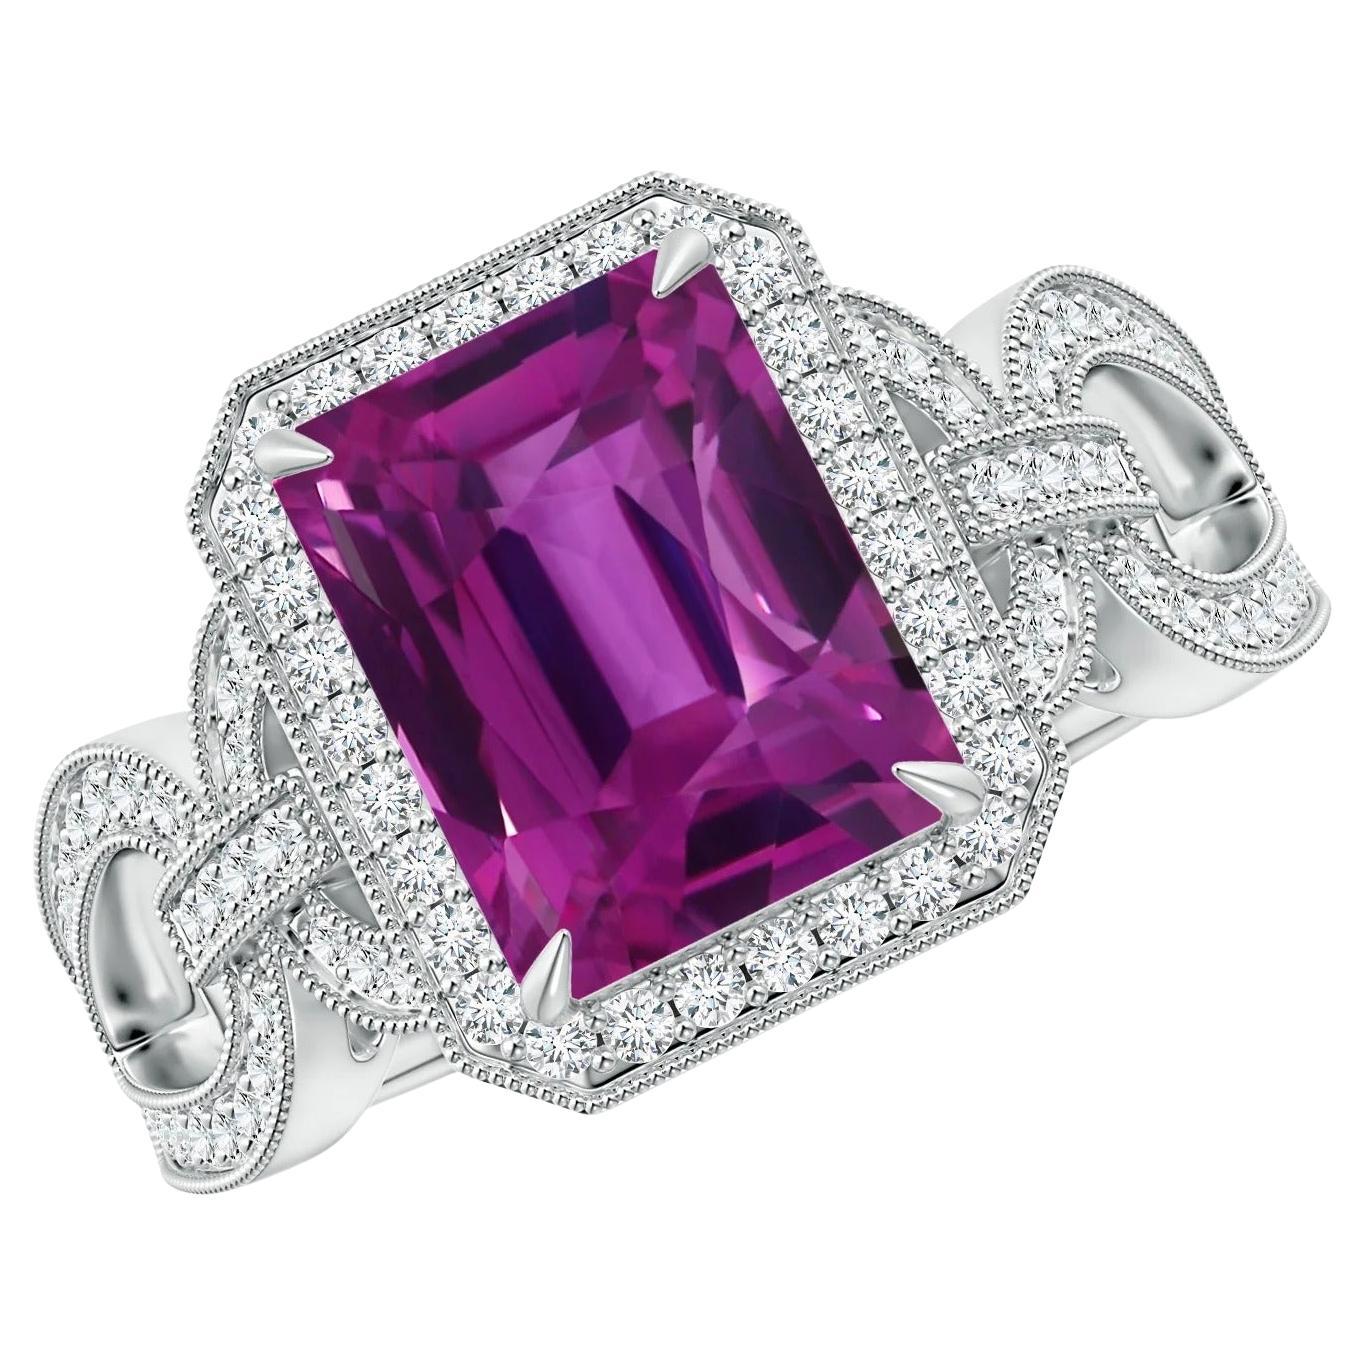 For Sale:  ANGARA GIA Certified Natural Pink Sapphire Ring in White Gold with Diamond Halo